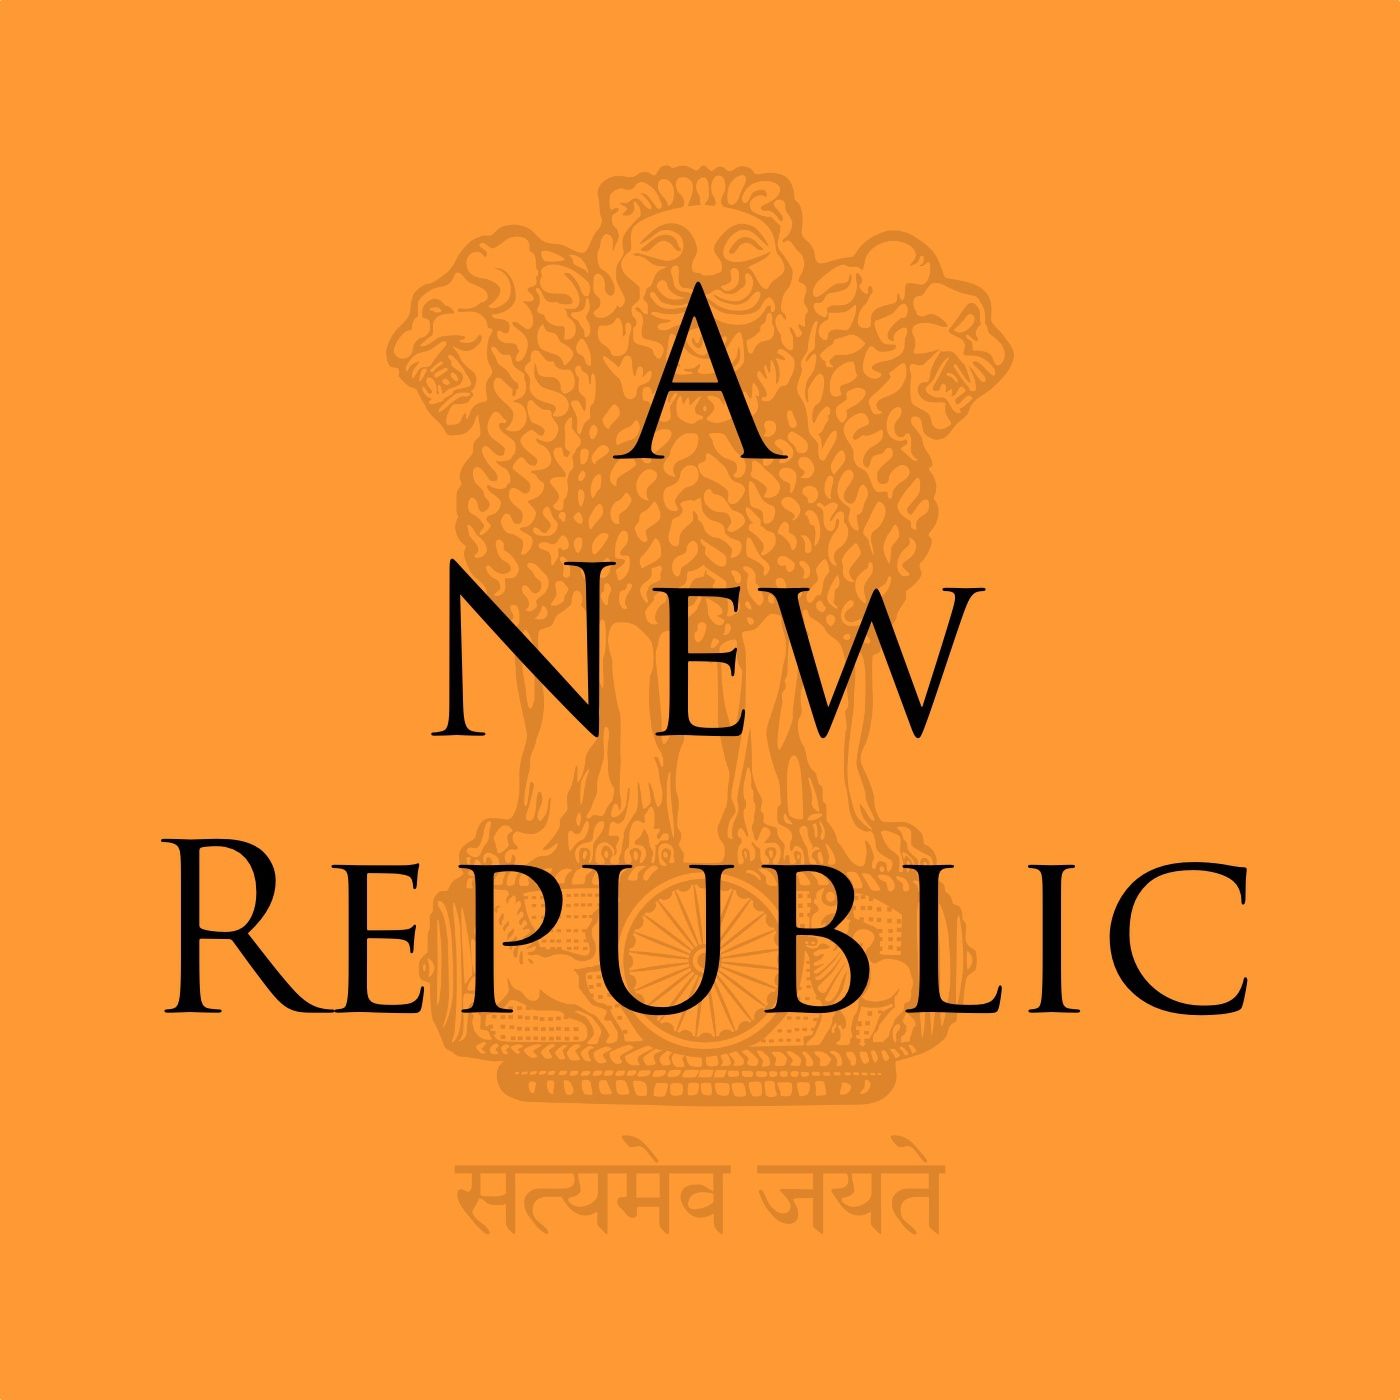 A New Republic - Episode 9: In the name of the father